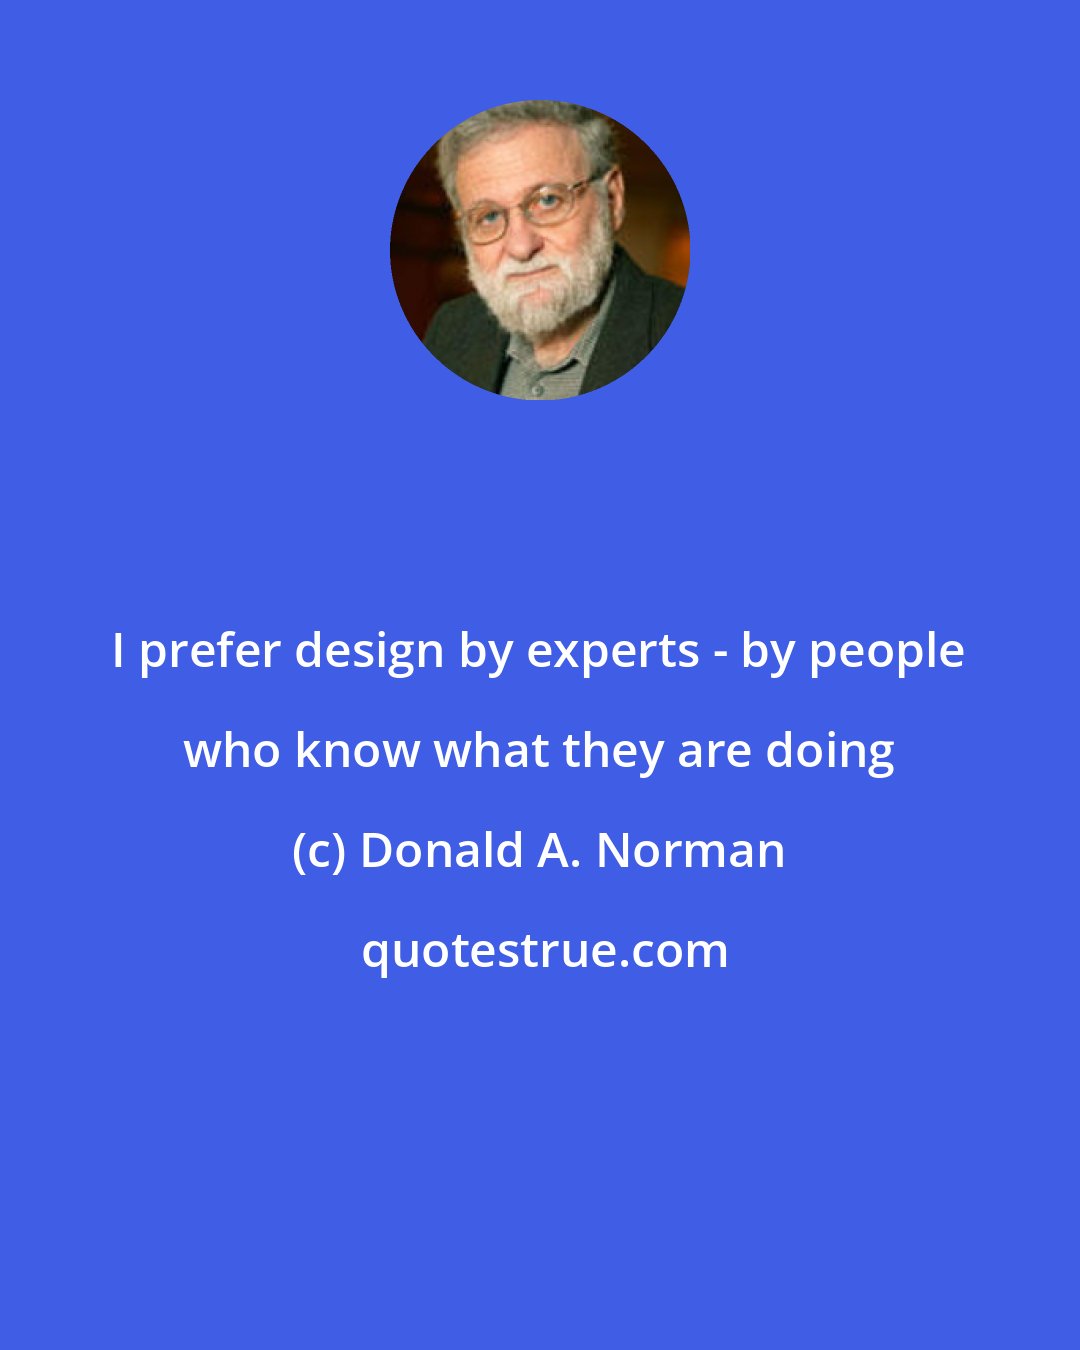 Donald A. Norman: I prefer design by experts - by people who know what they are doing